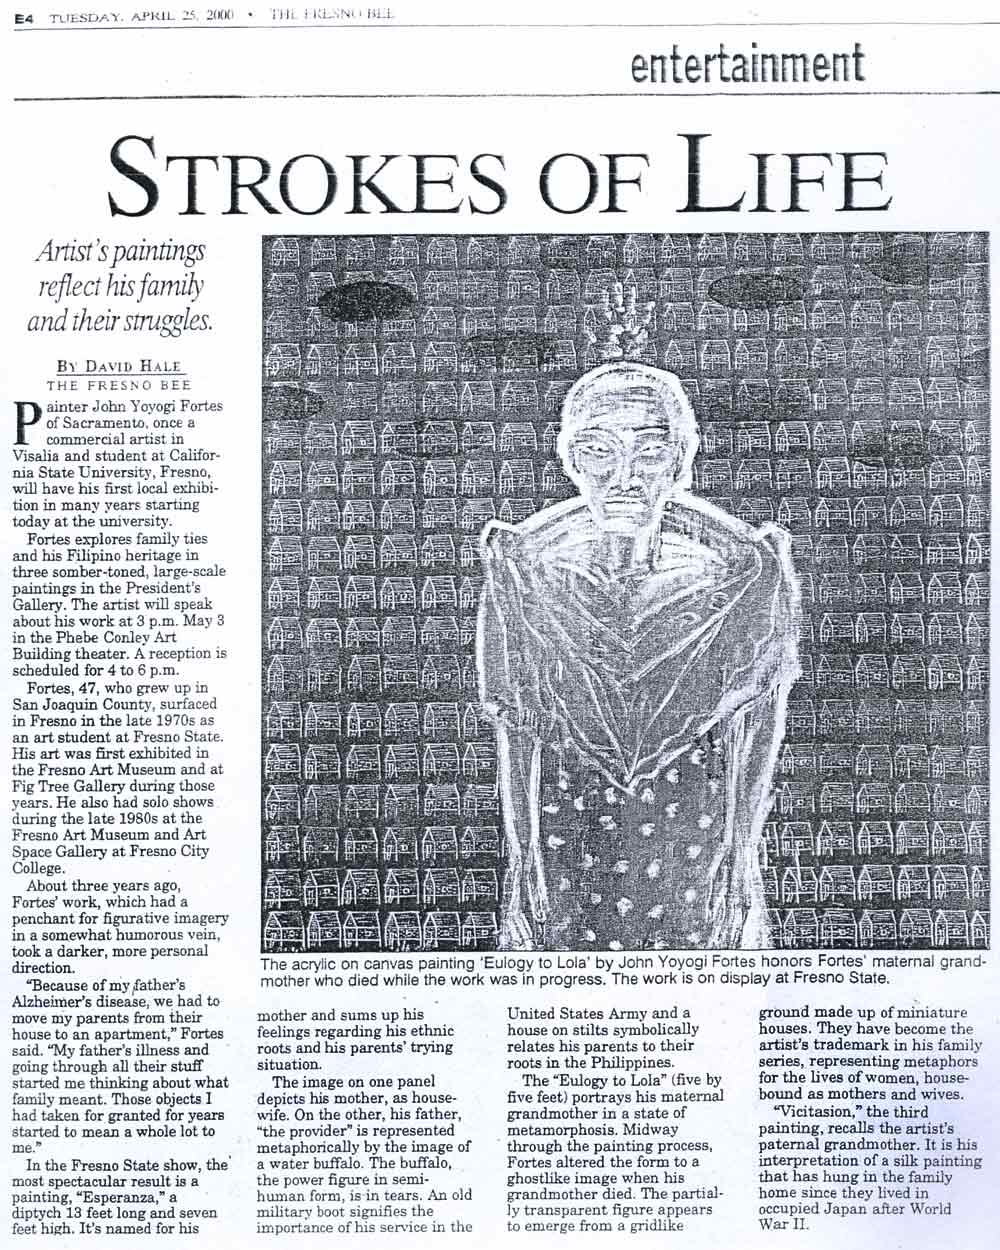 Strokes of Life, article